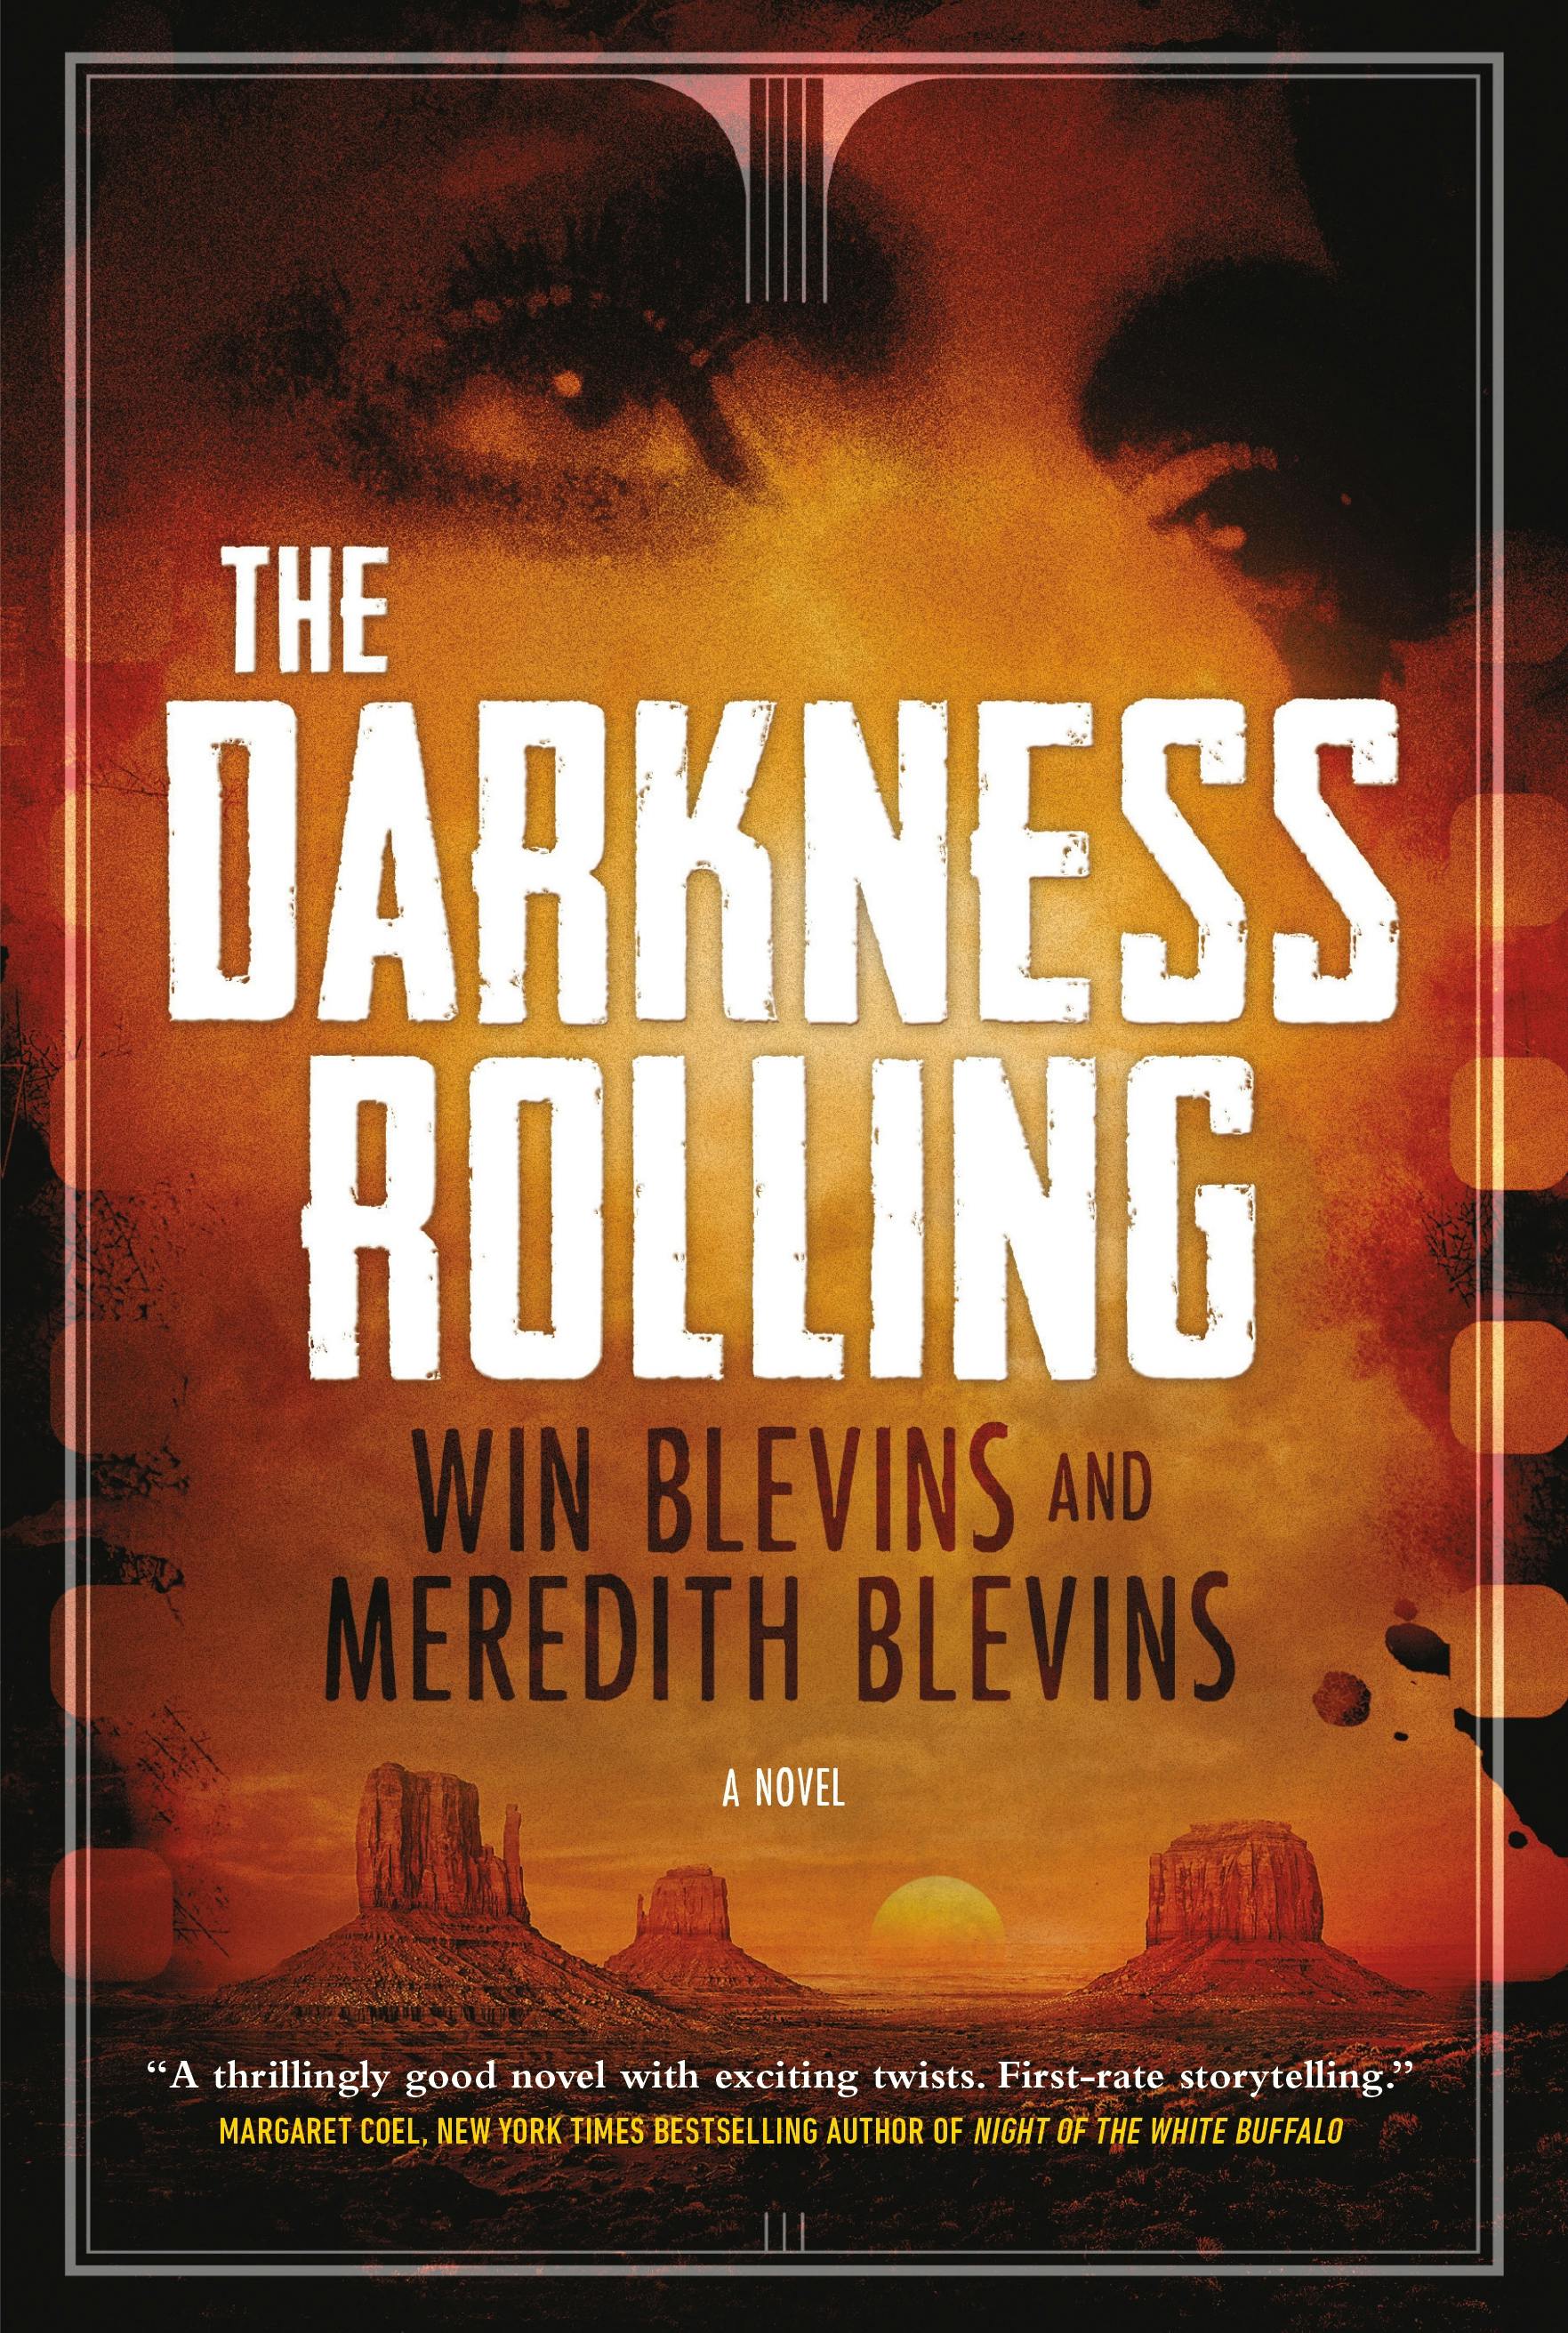 Cover for the book titled as: The Darkness Rolling